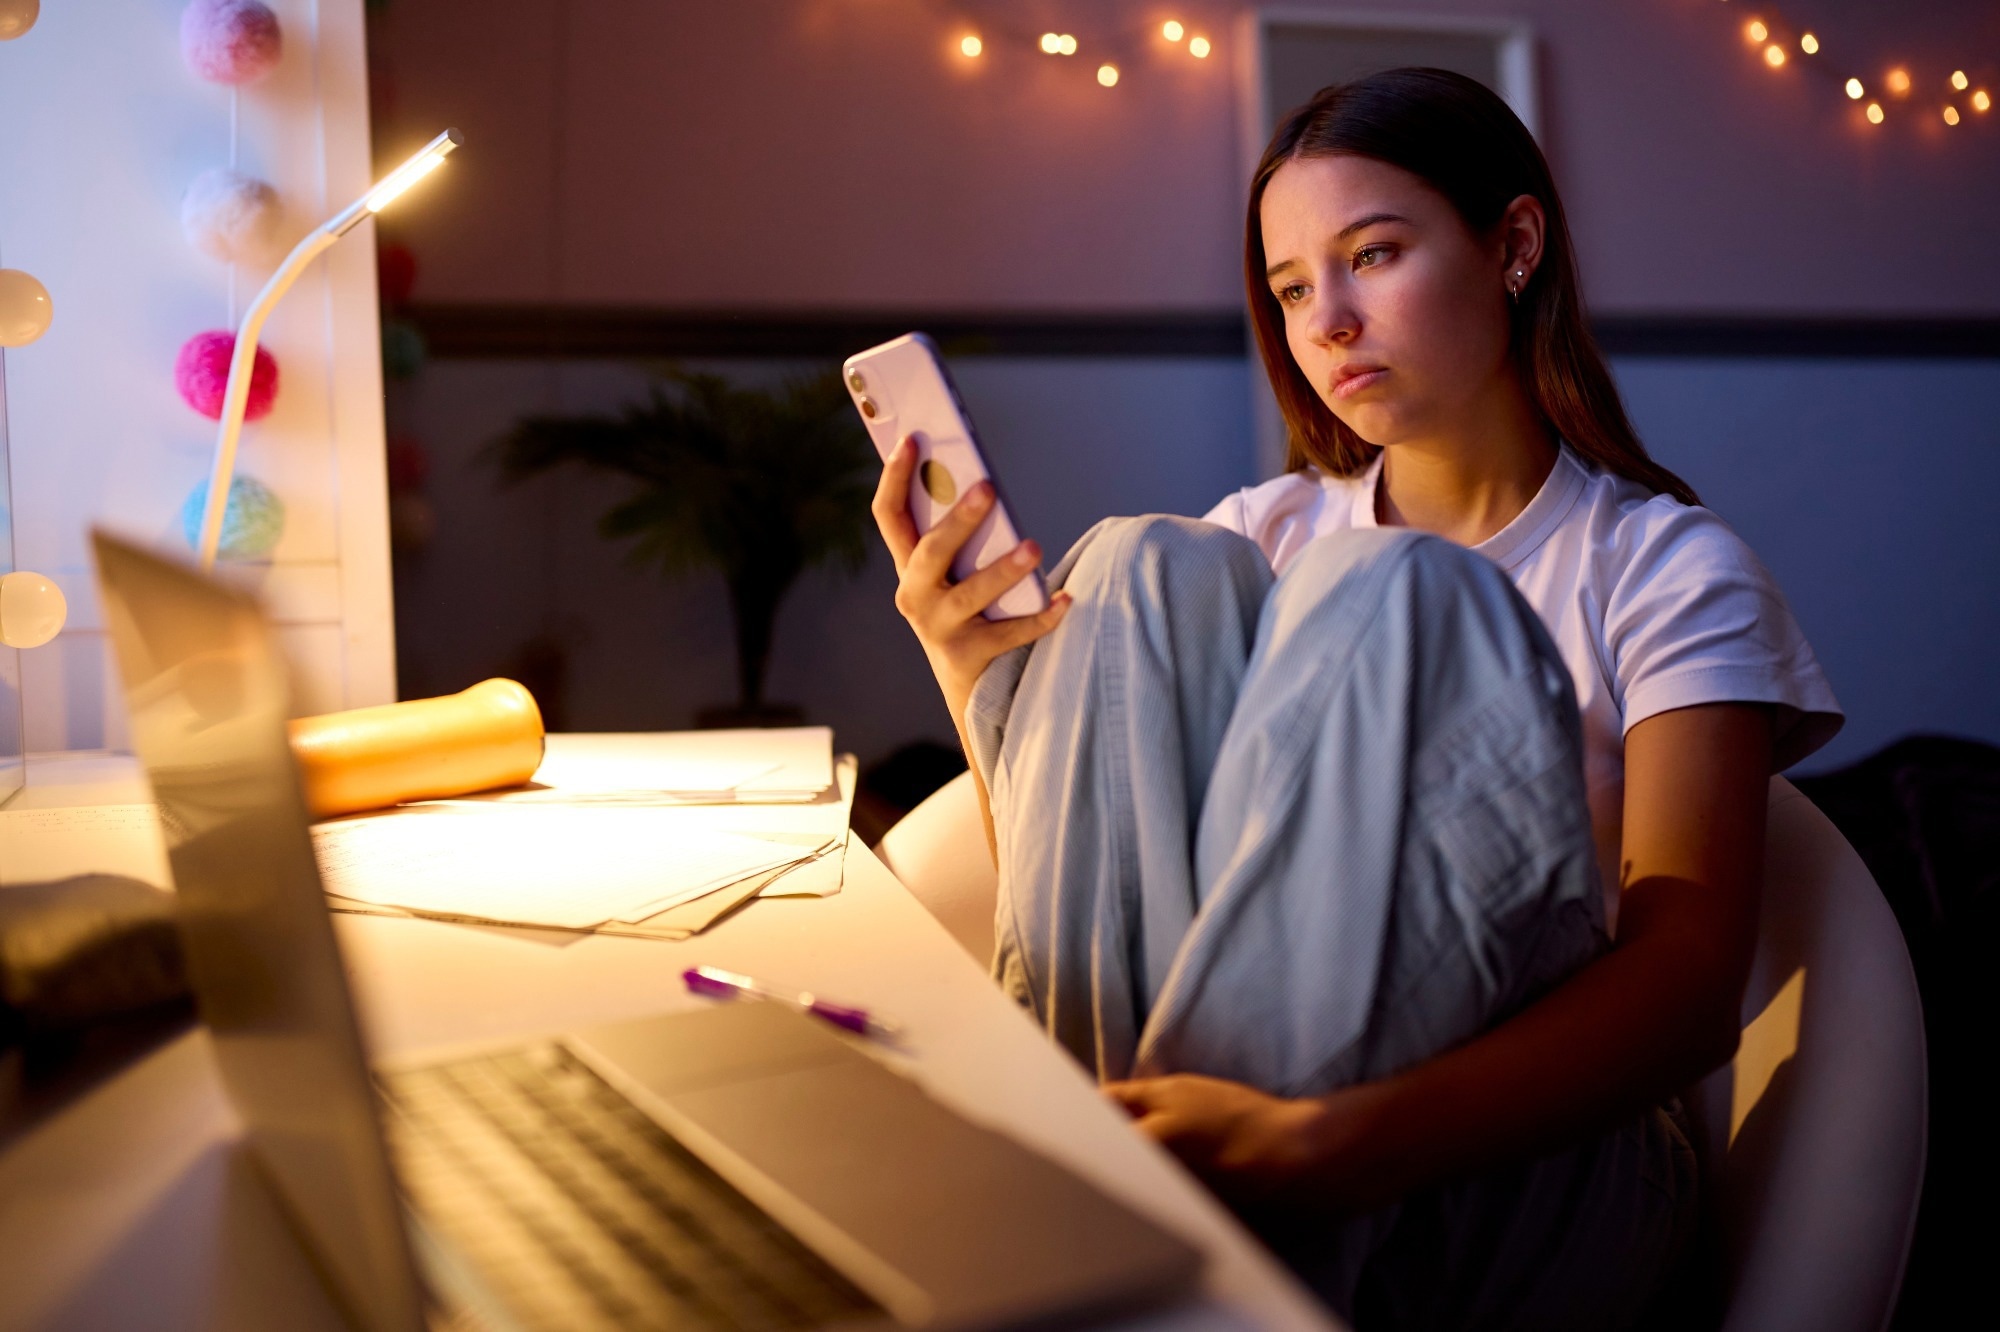 Study: Trajectories of Adolescent Media Use and Their Associations With Psychotic Experiences. Image Credit: Monkey Business Images/Shutterstock.com